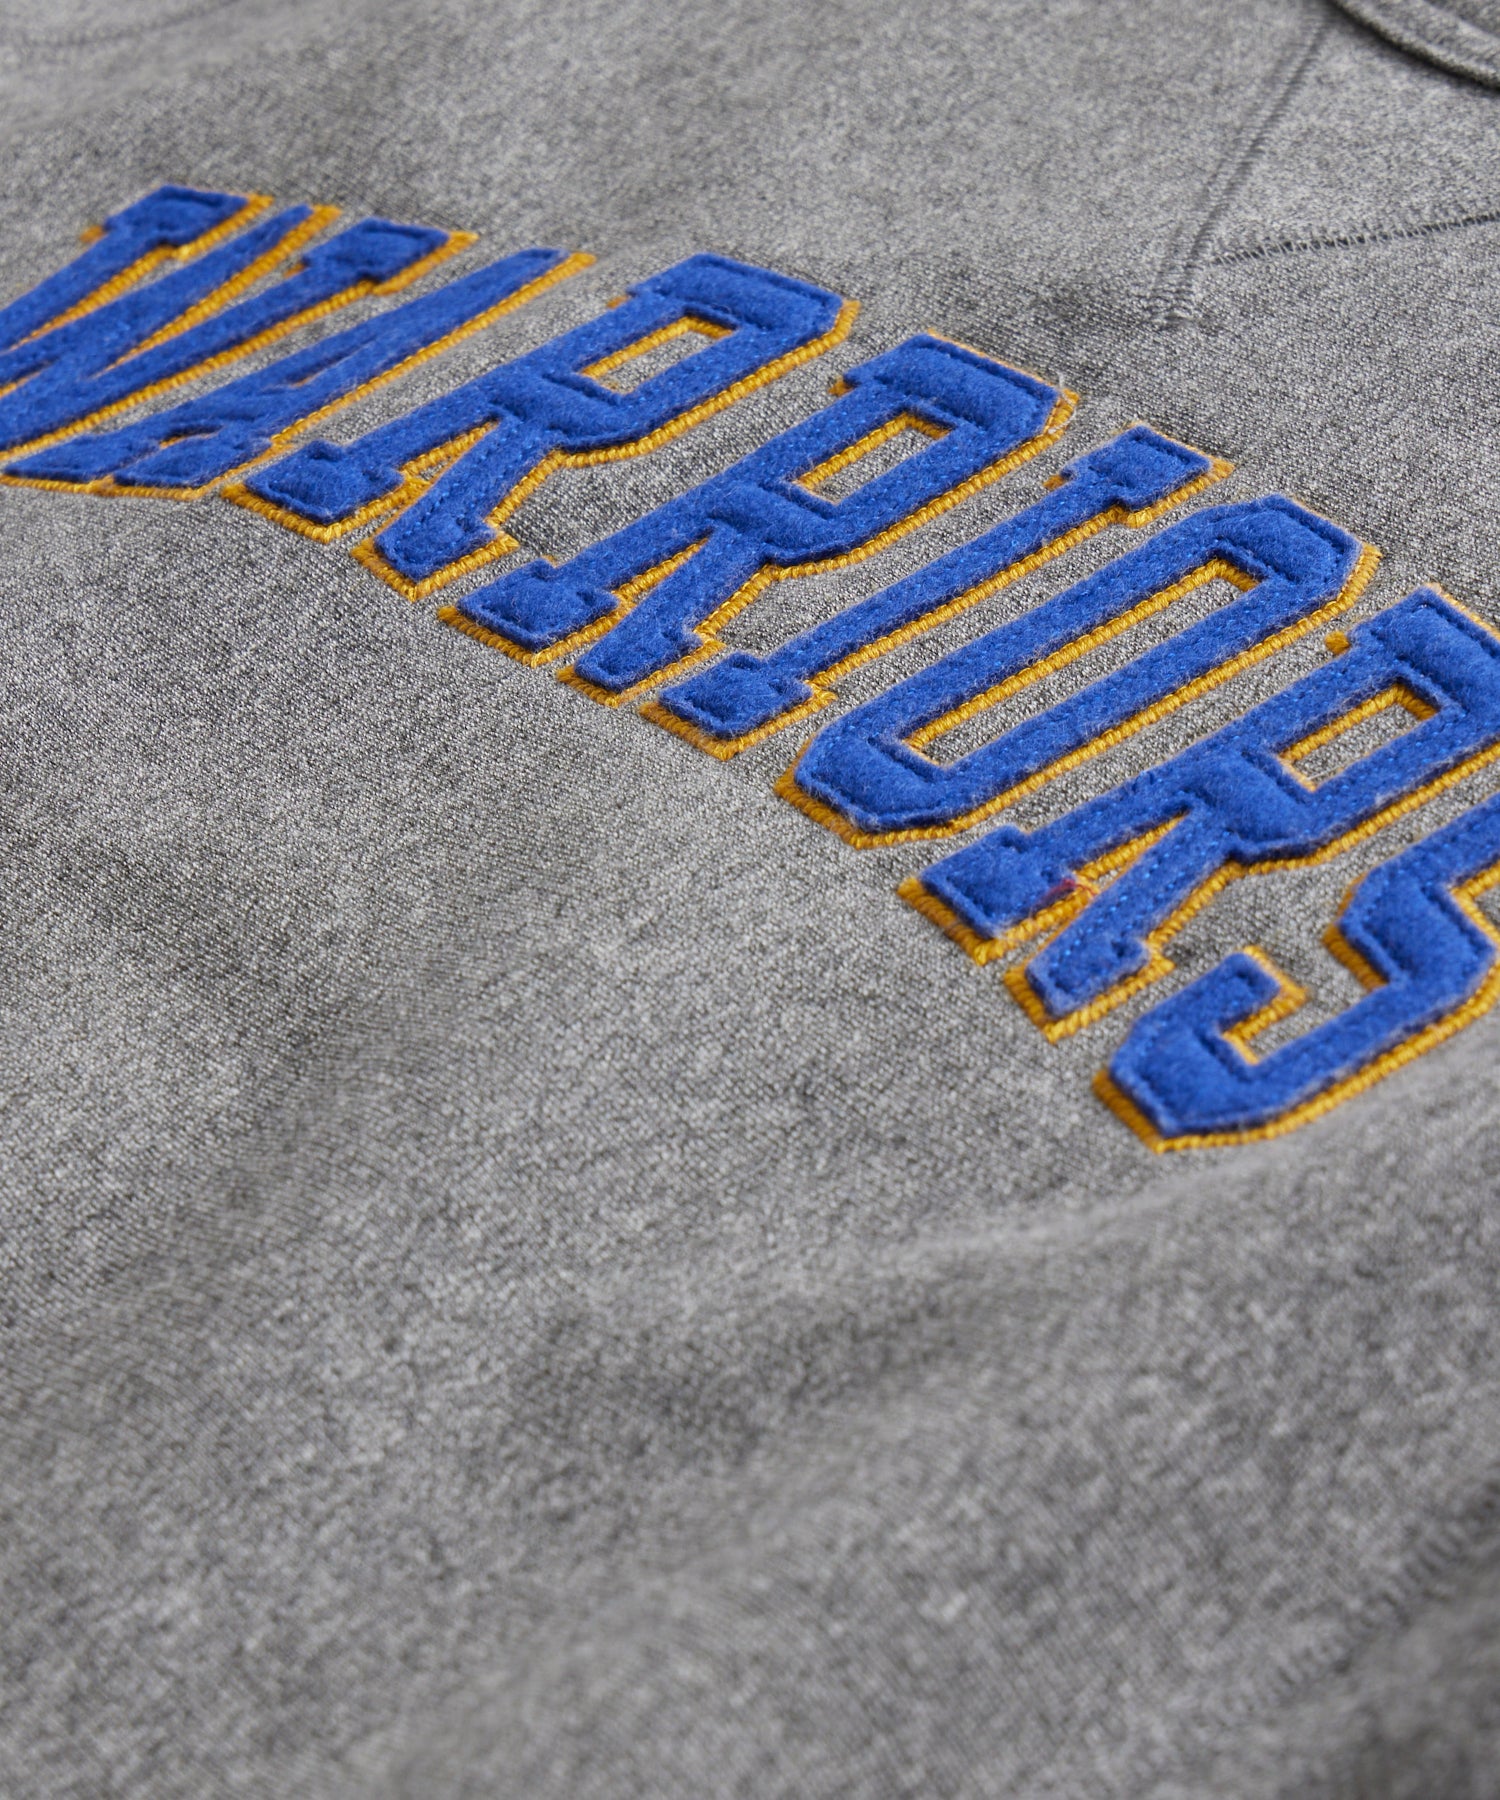 GOLDEN STATE WARRIORS "THE CITY" MITCHELL & NESS